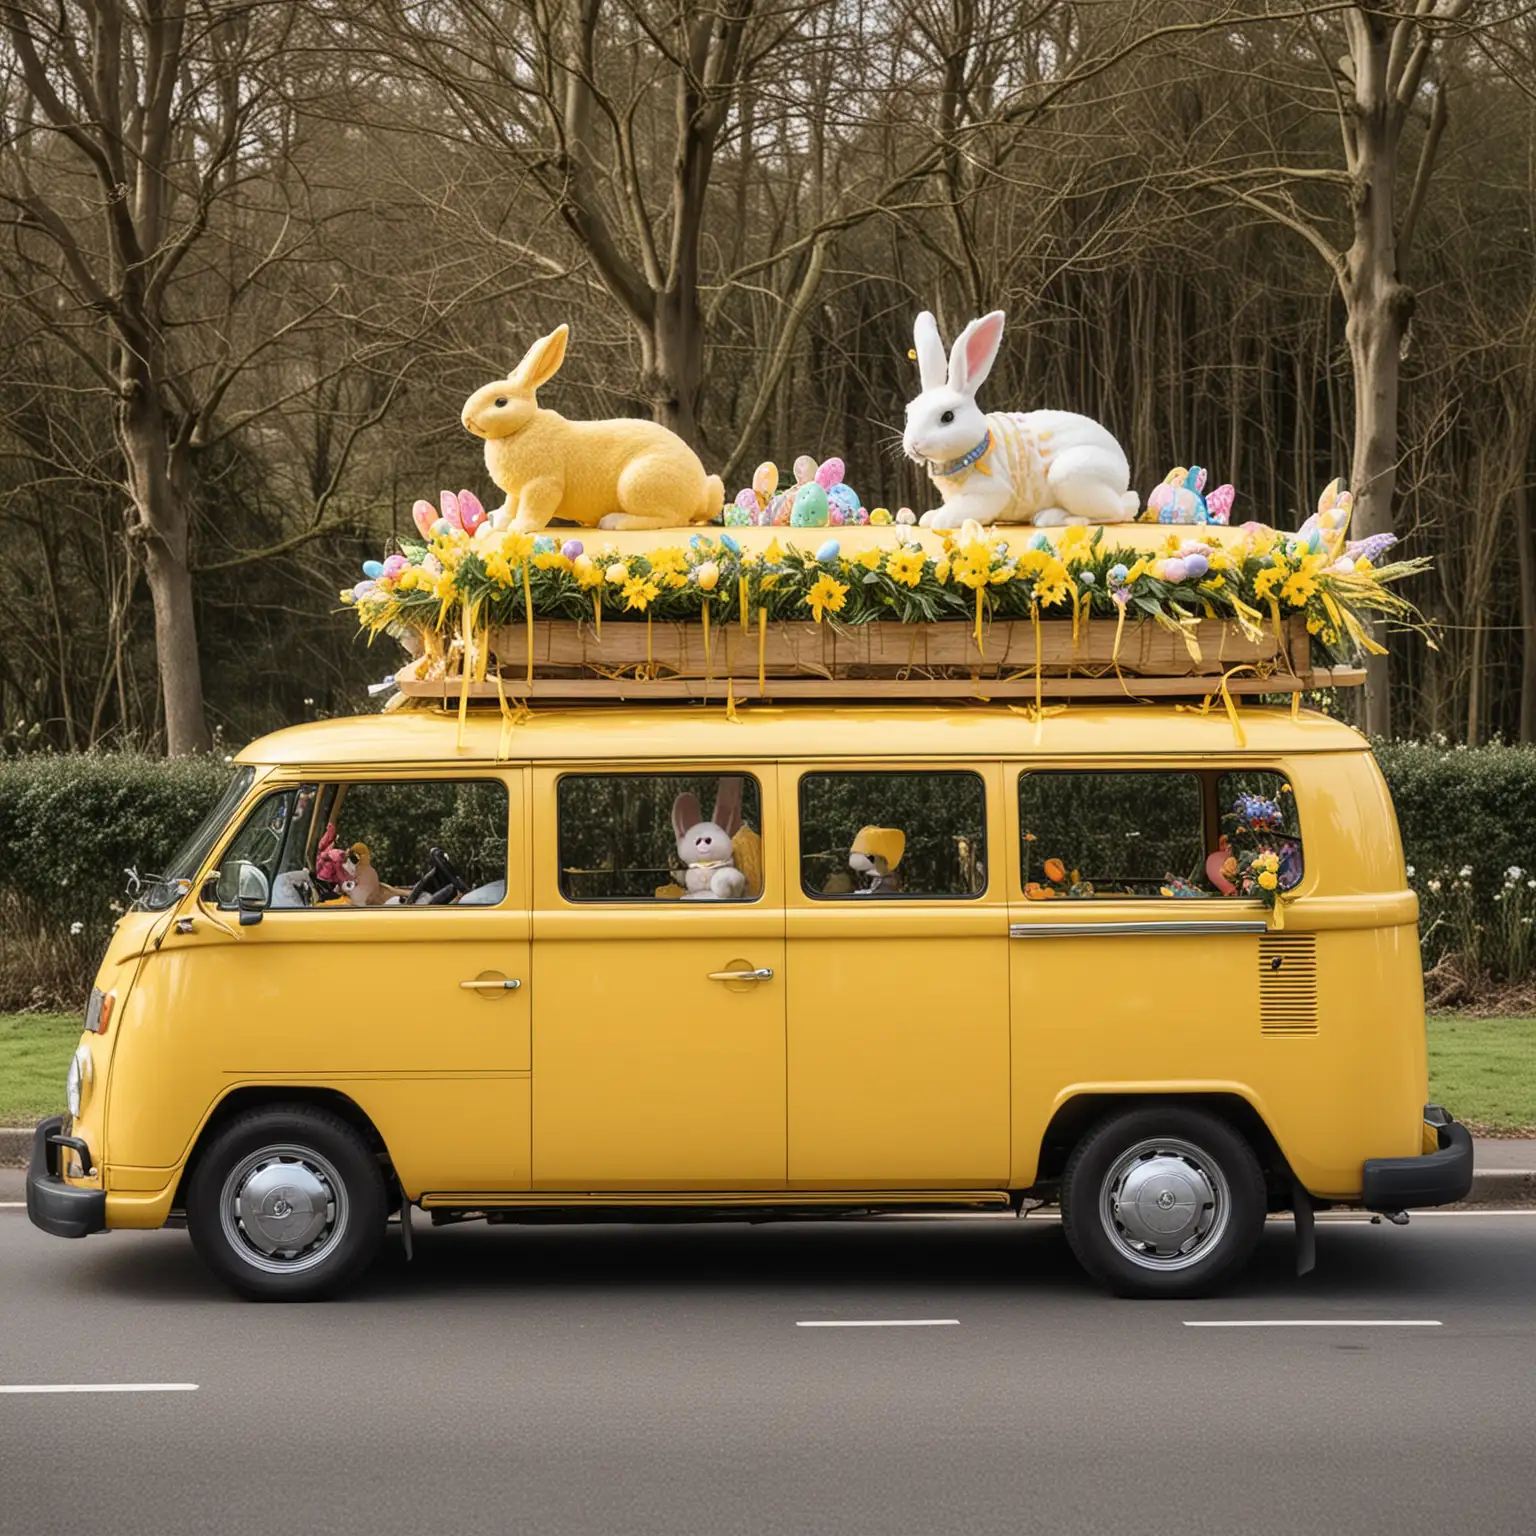 Cheerful Easter Bunny Driving a Sunny Yellow VW Transporter Van